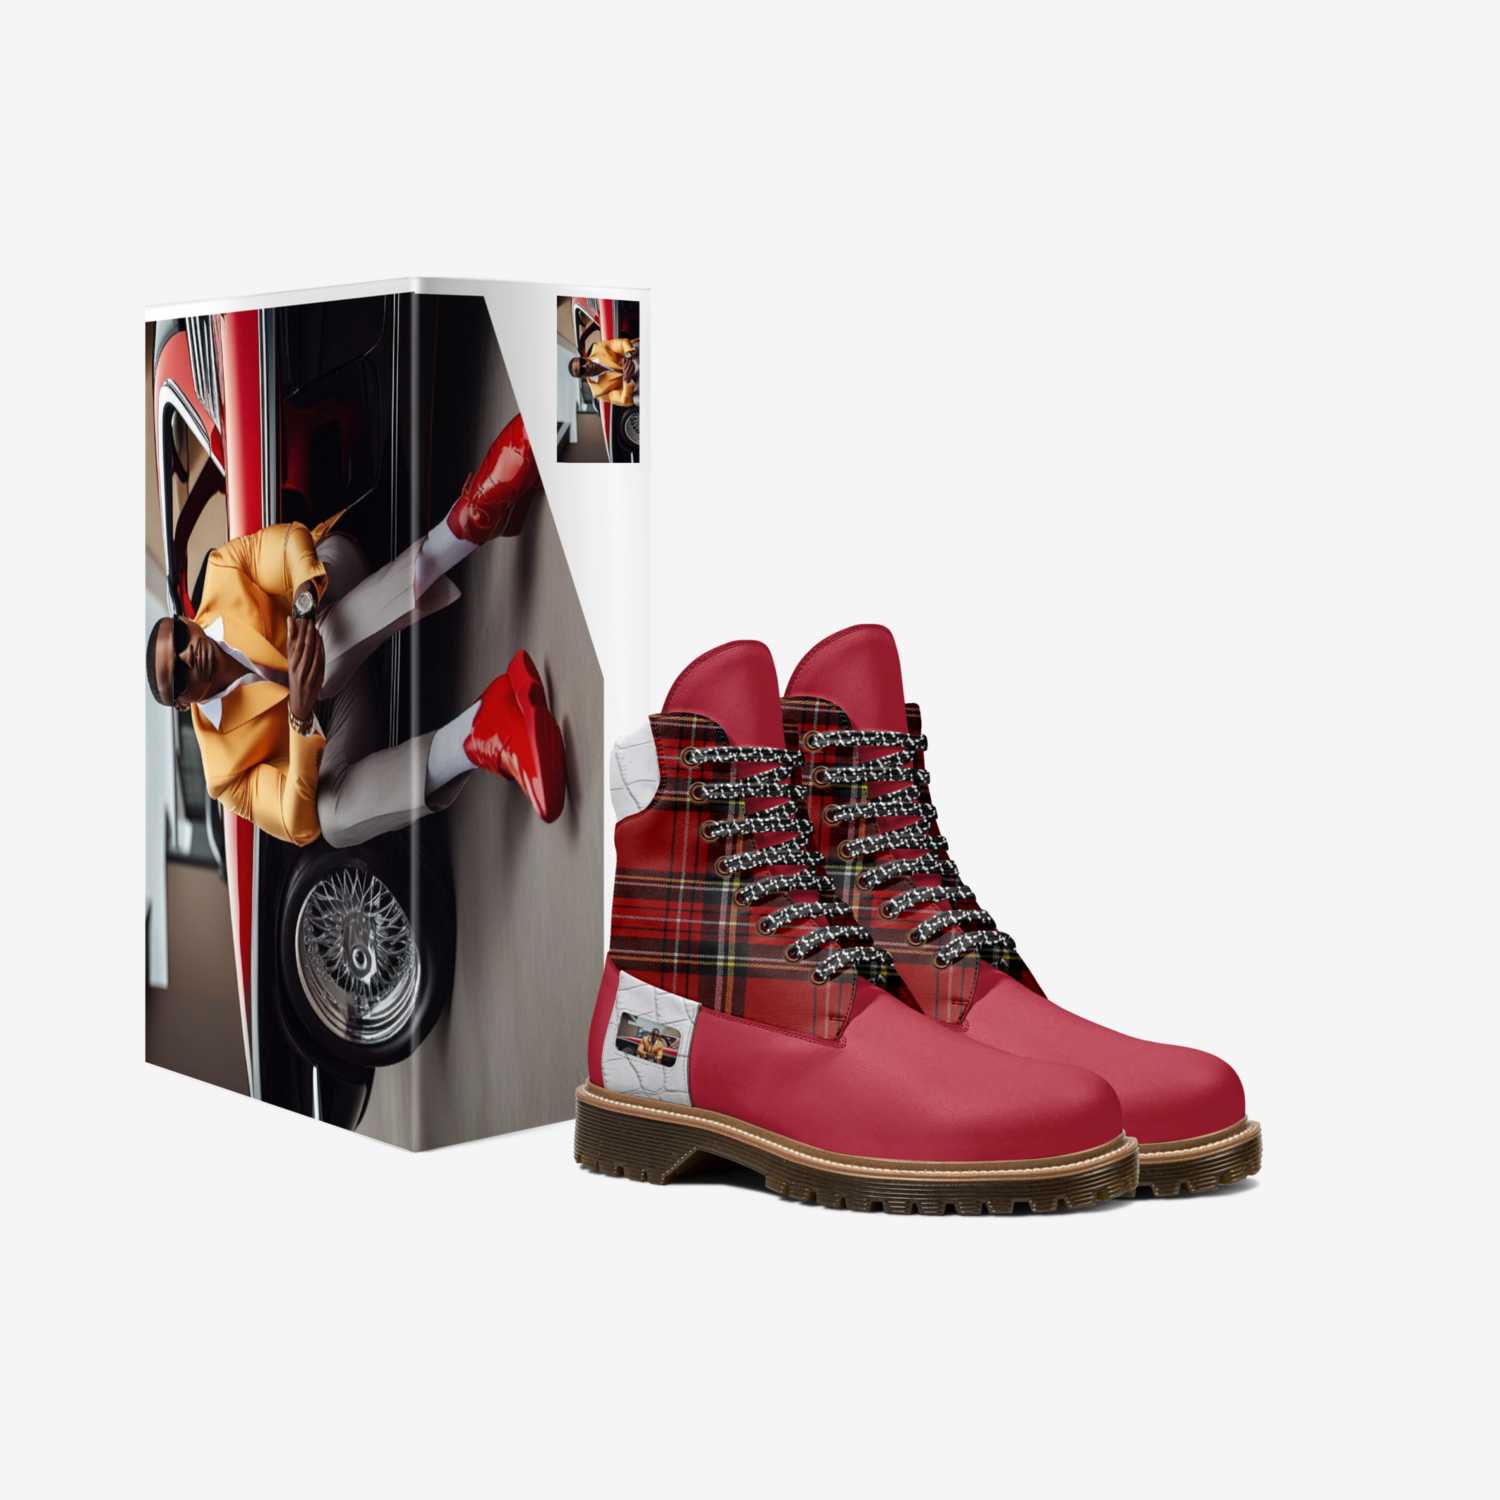 Redd_Man_Series custom made in Italy shoes by Desiree Sims | Box view